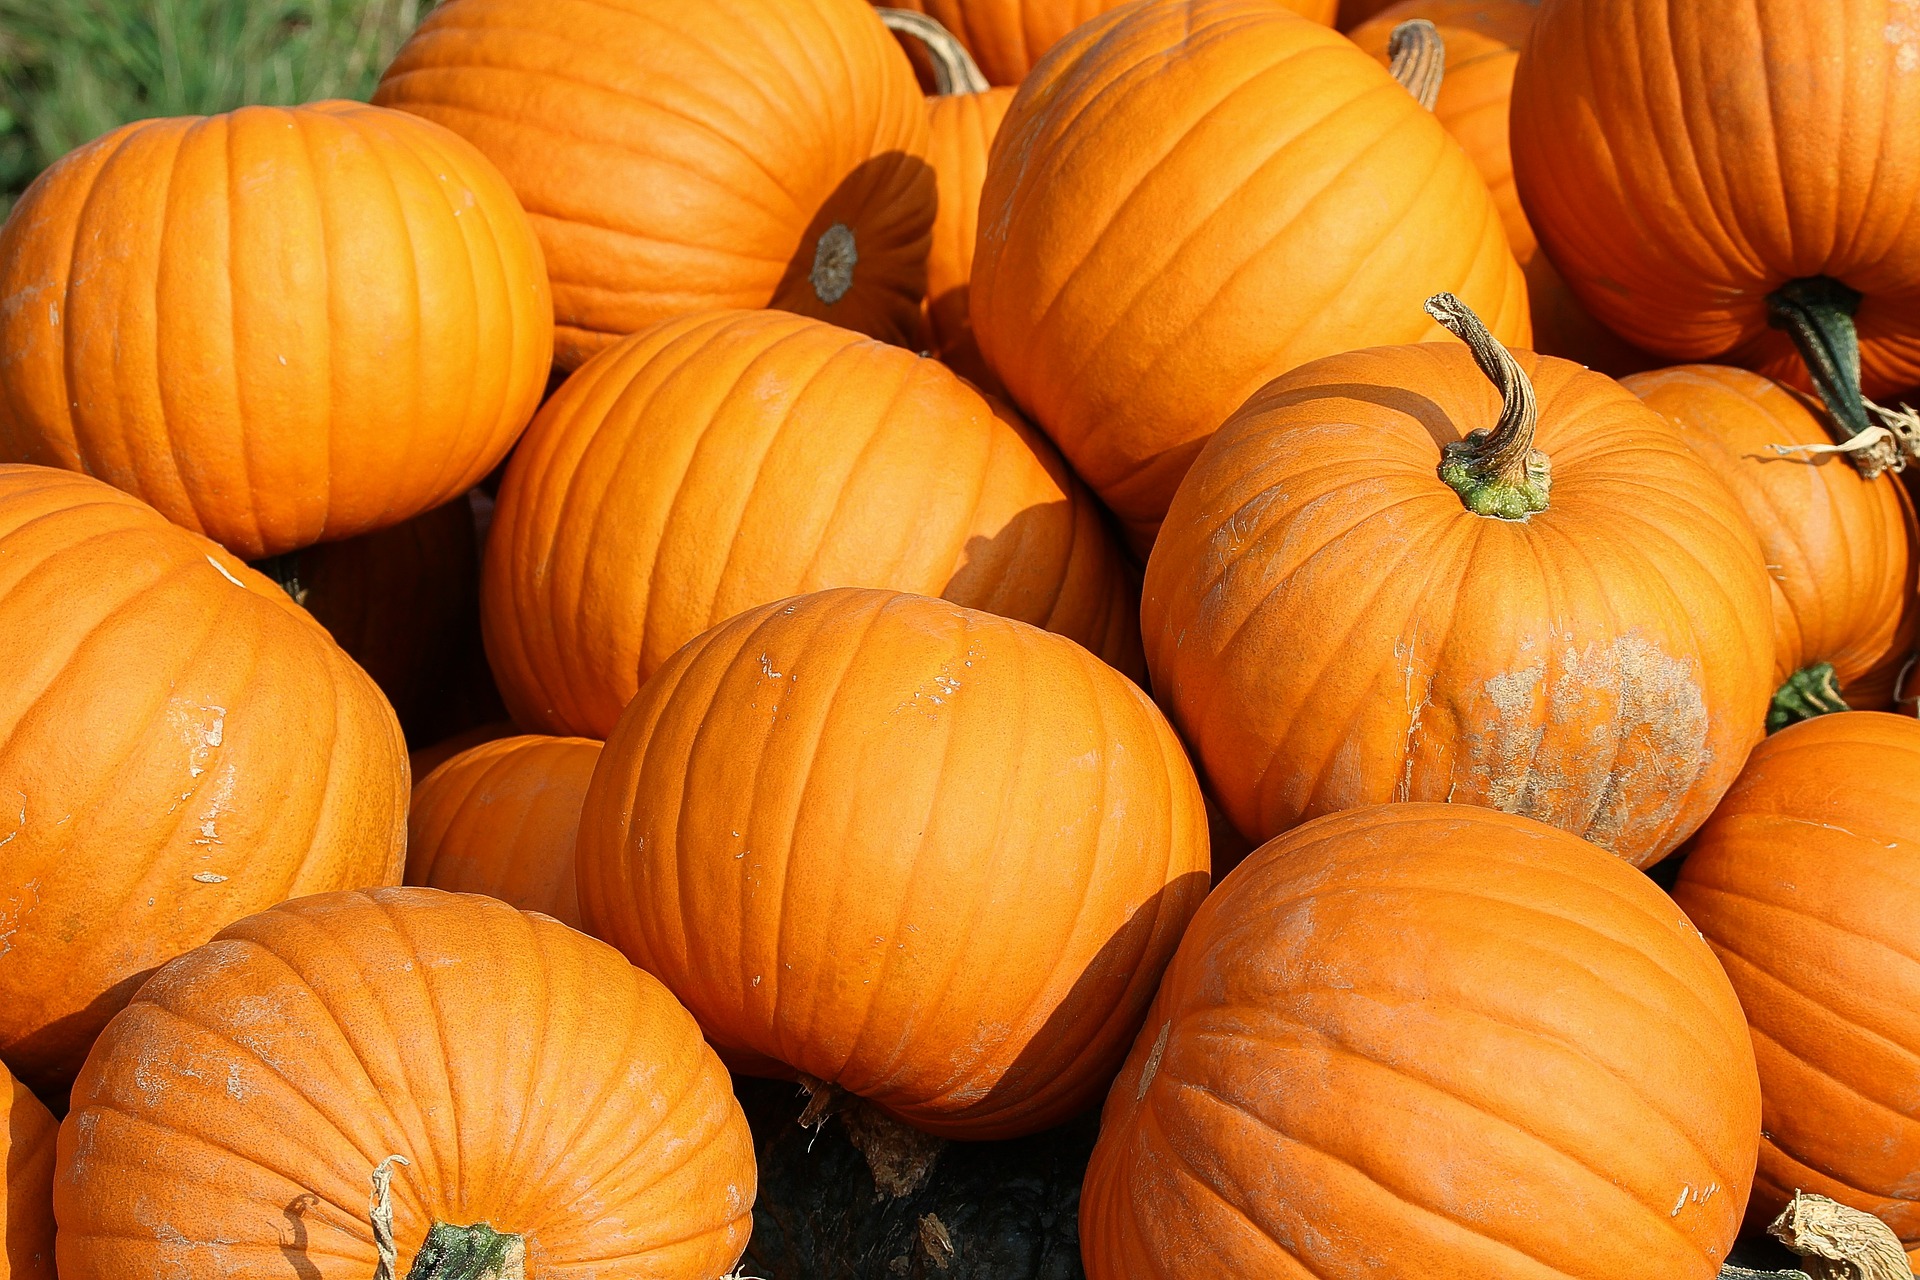 Pumpkin is also in fruit with a serious risk of extinction if the pollinators disappear.